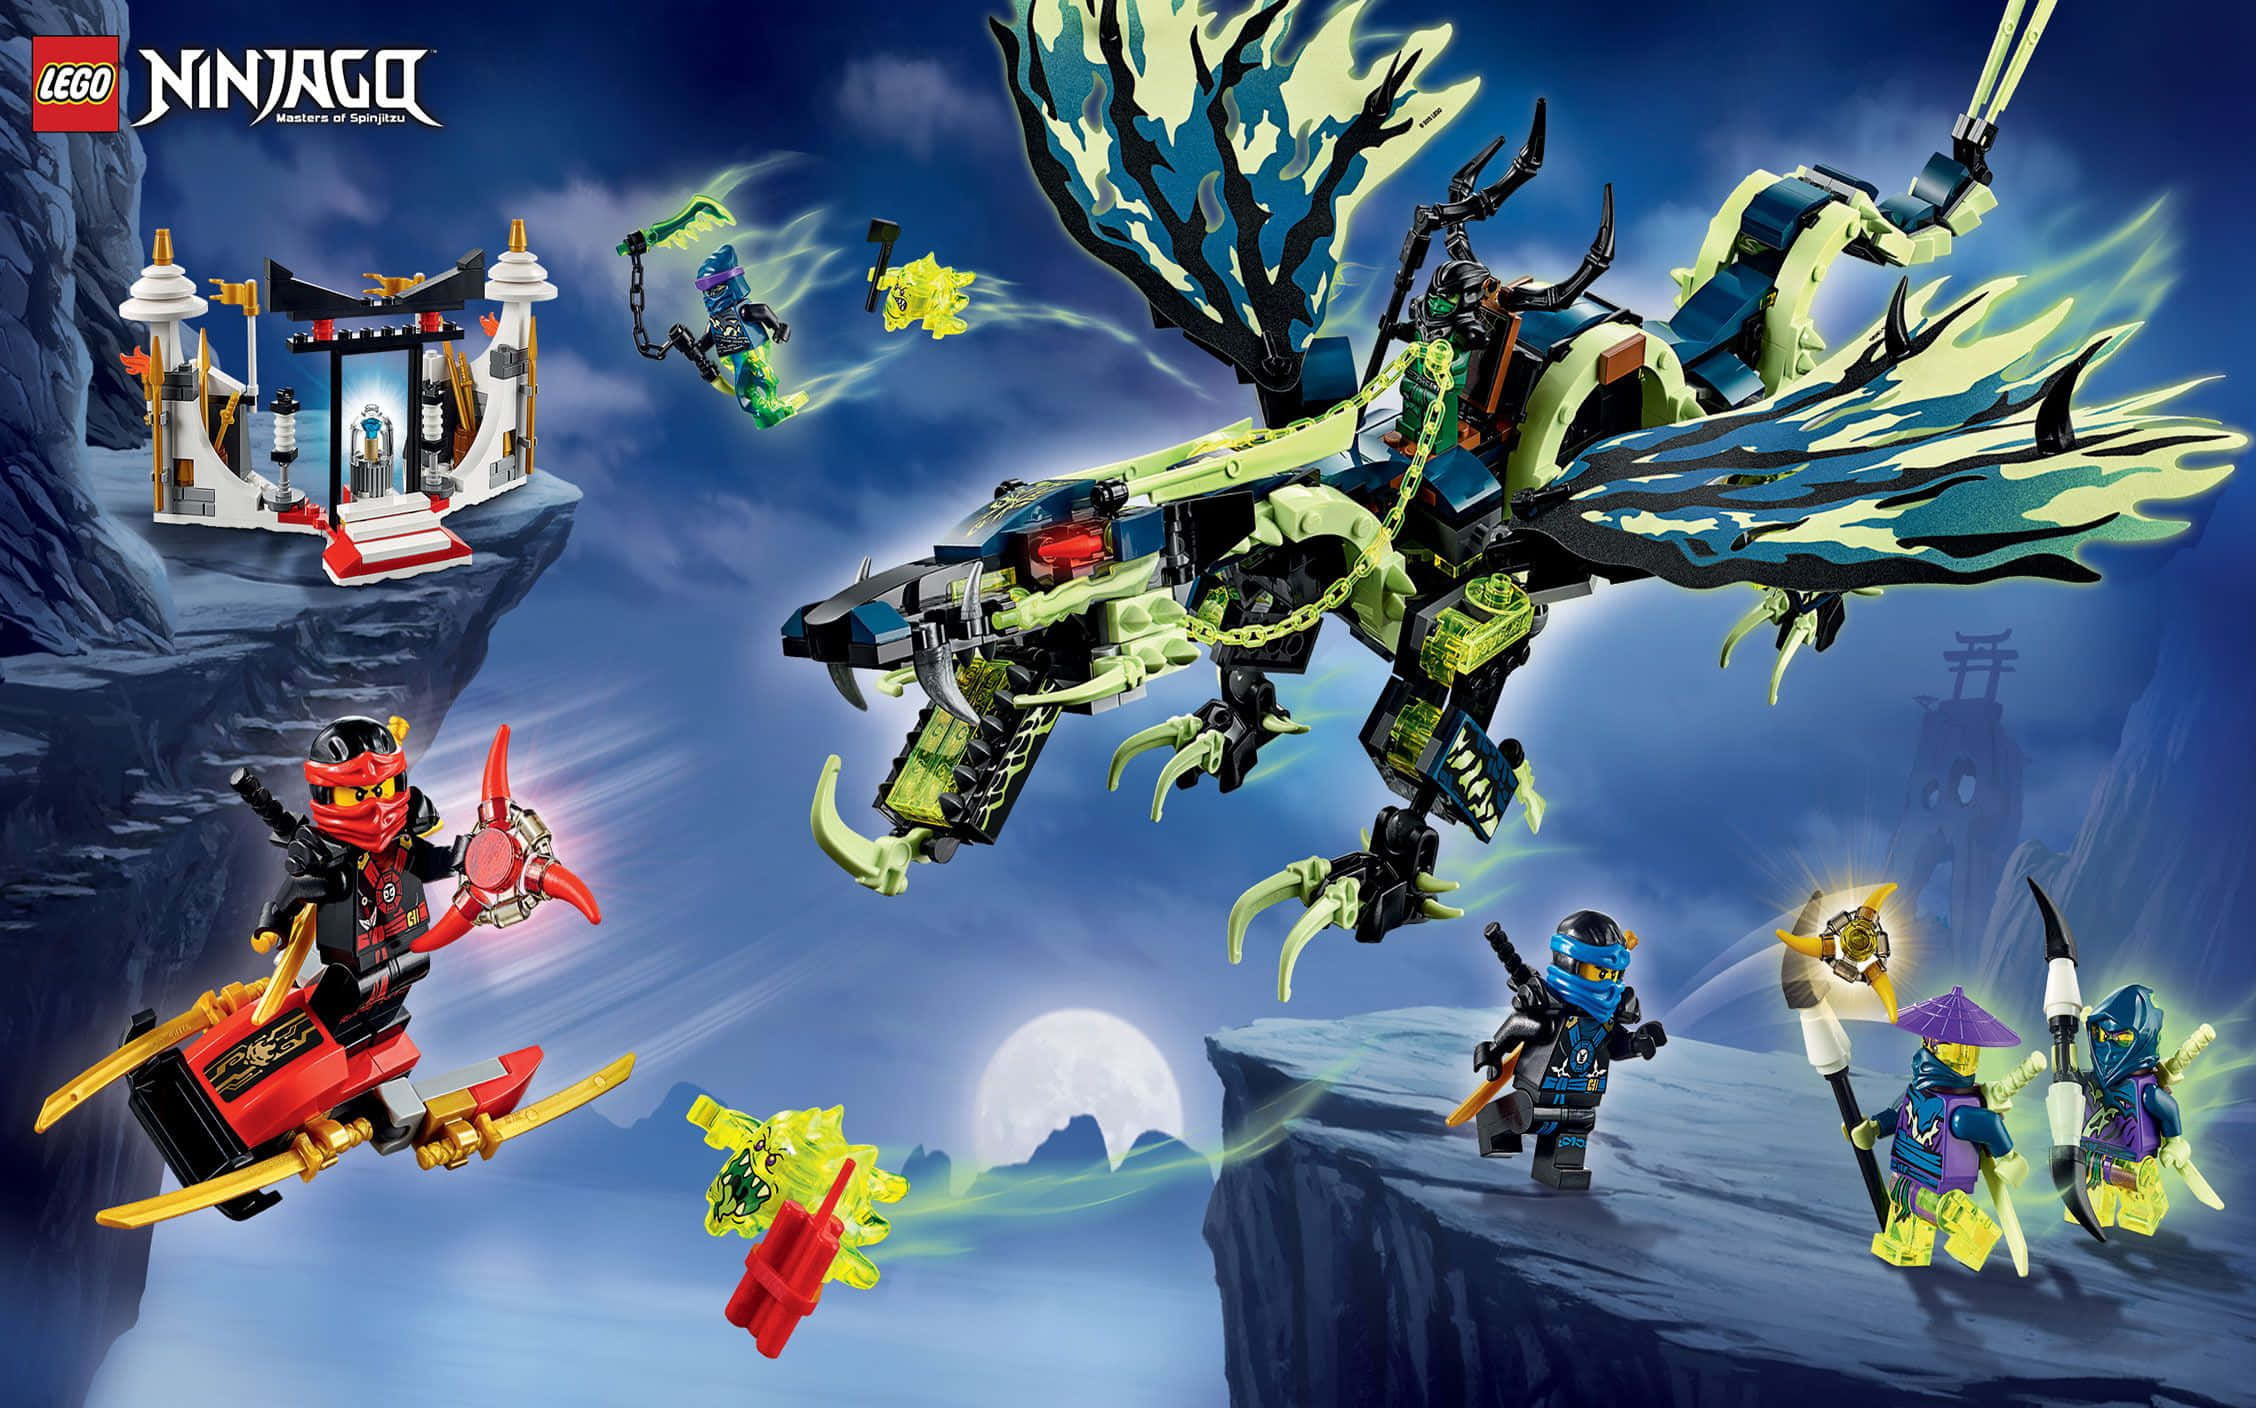 The Ninjago Team springs into action against the dark forces!